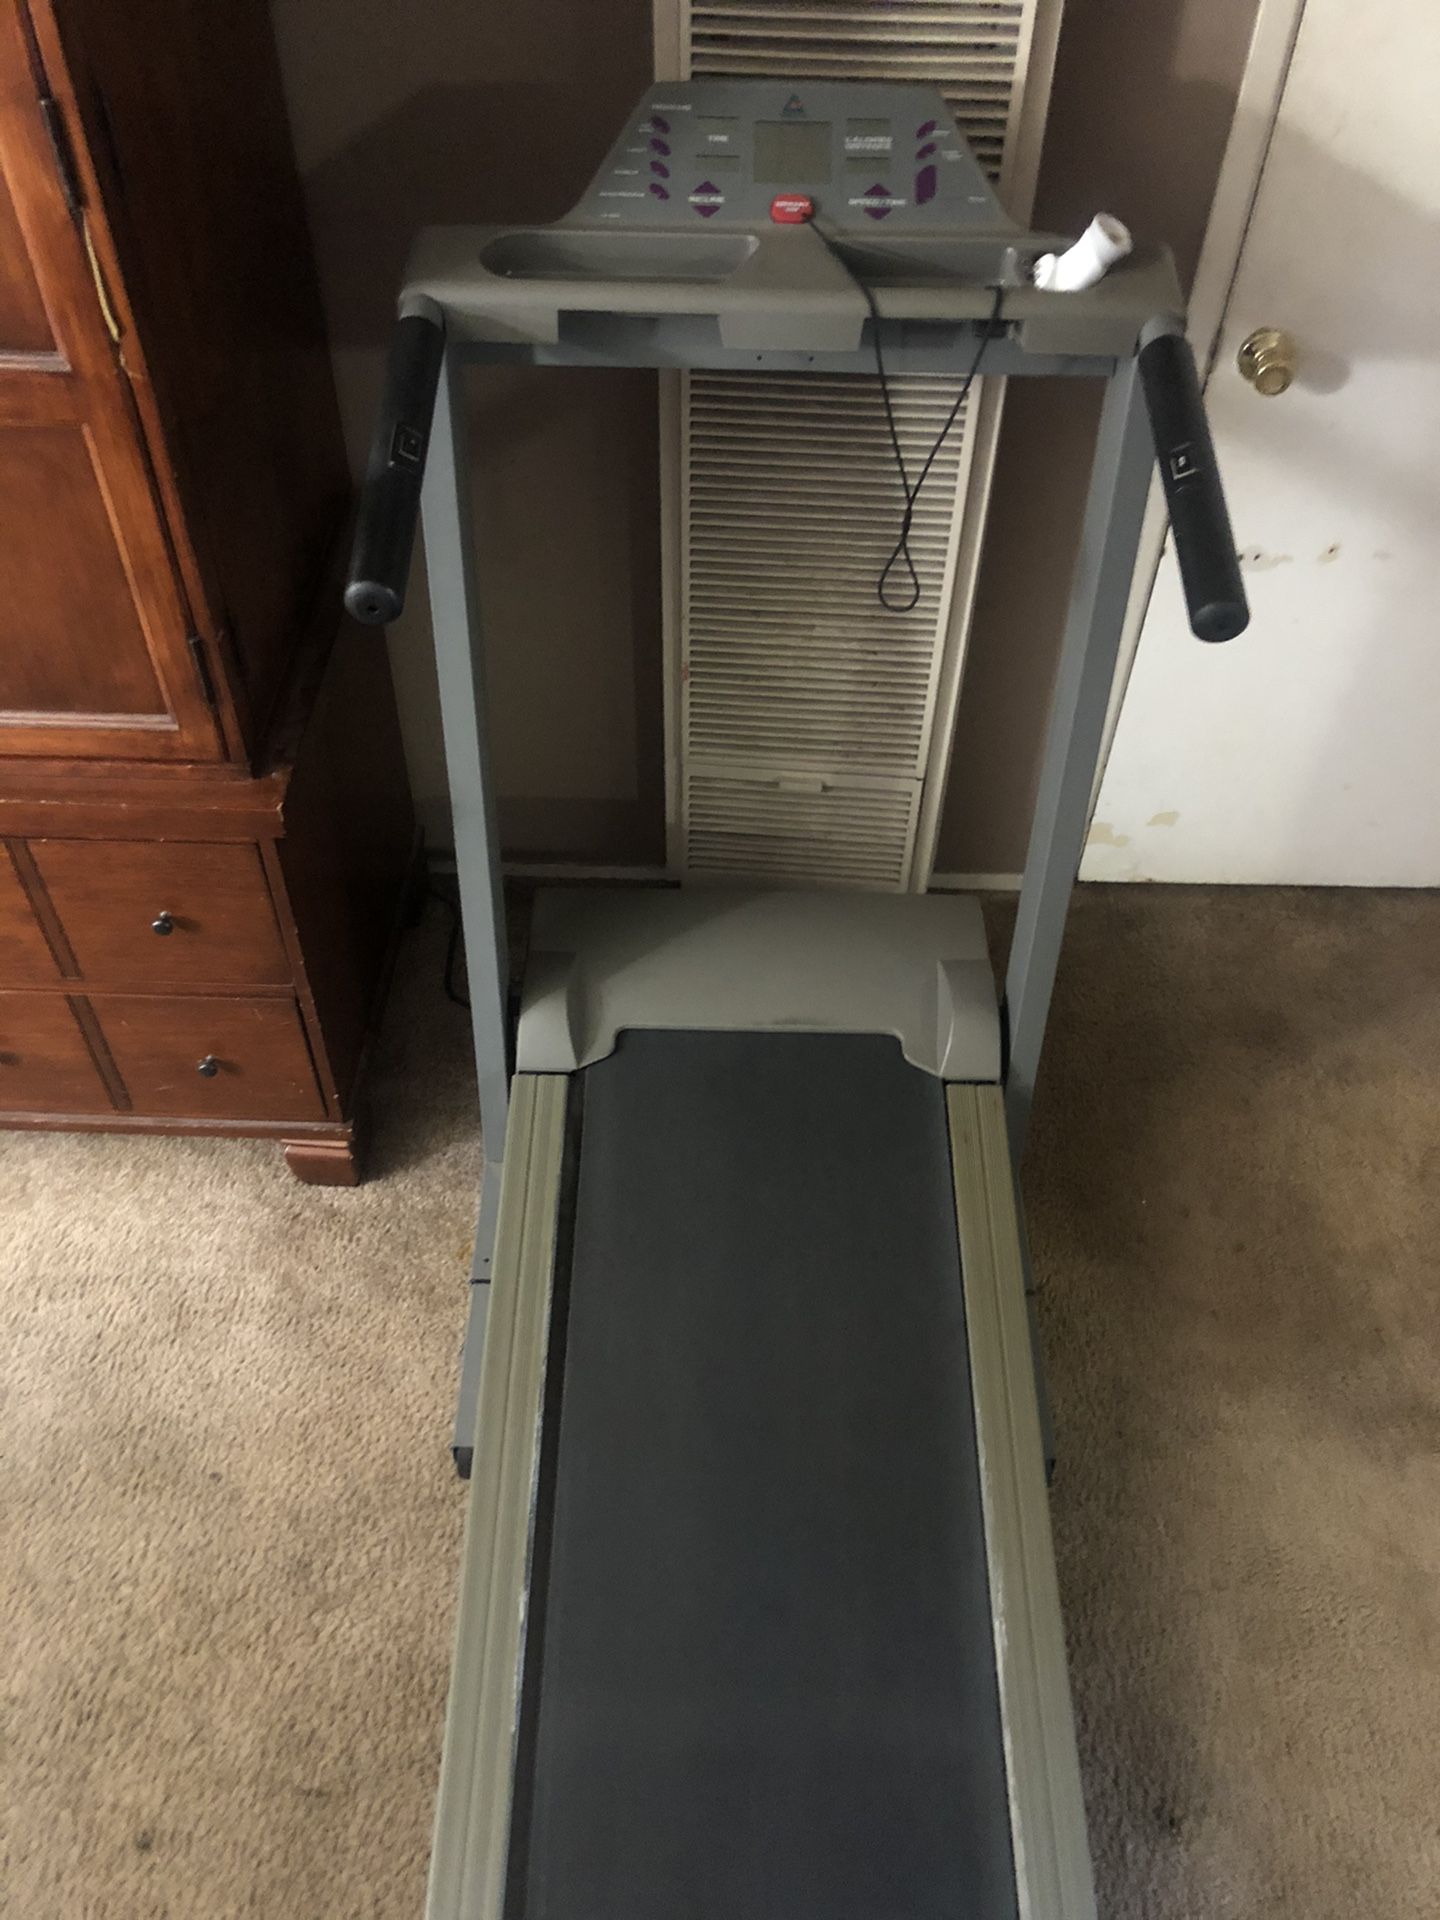 Treadmill in very good condition! Works very well